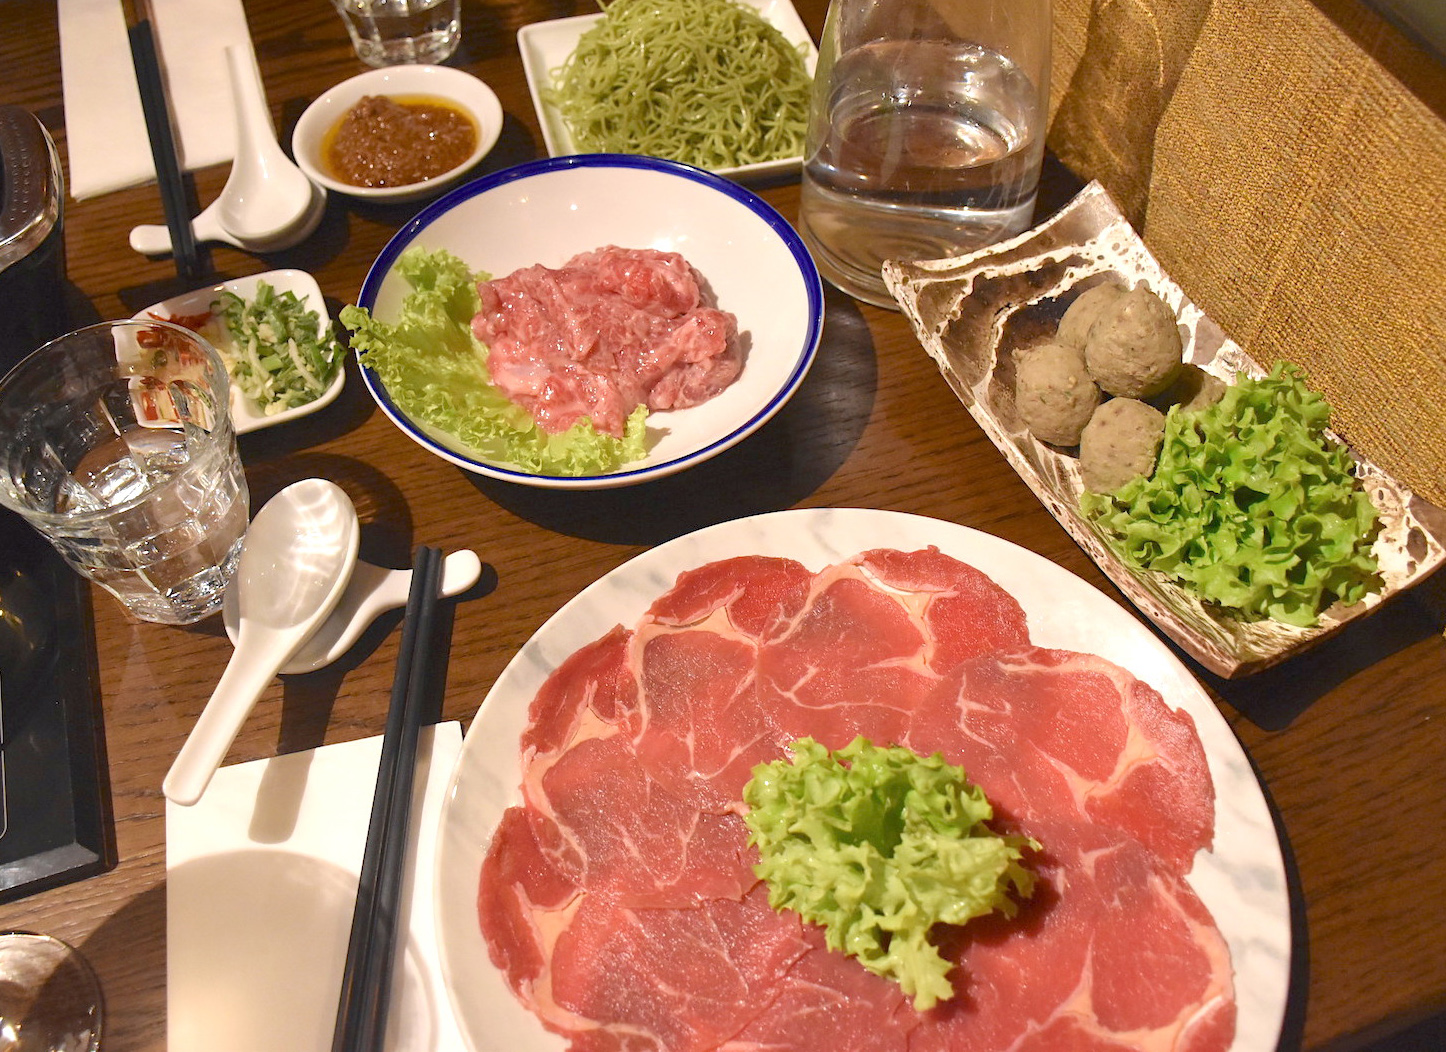 Hot Pot Restaurant Review: Authentic Hot Pot Experience in Chinatown